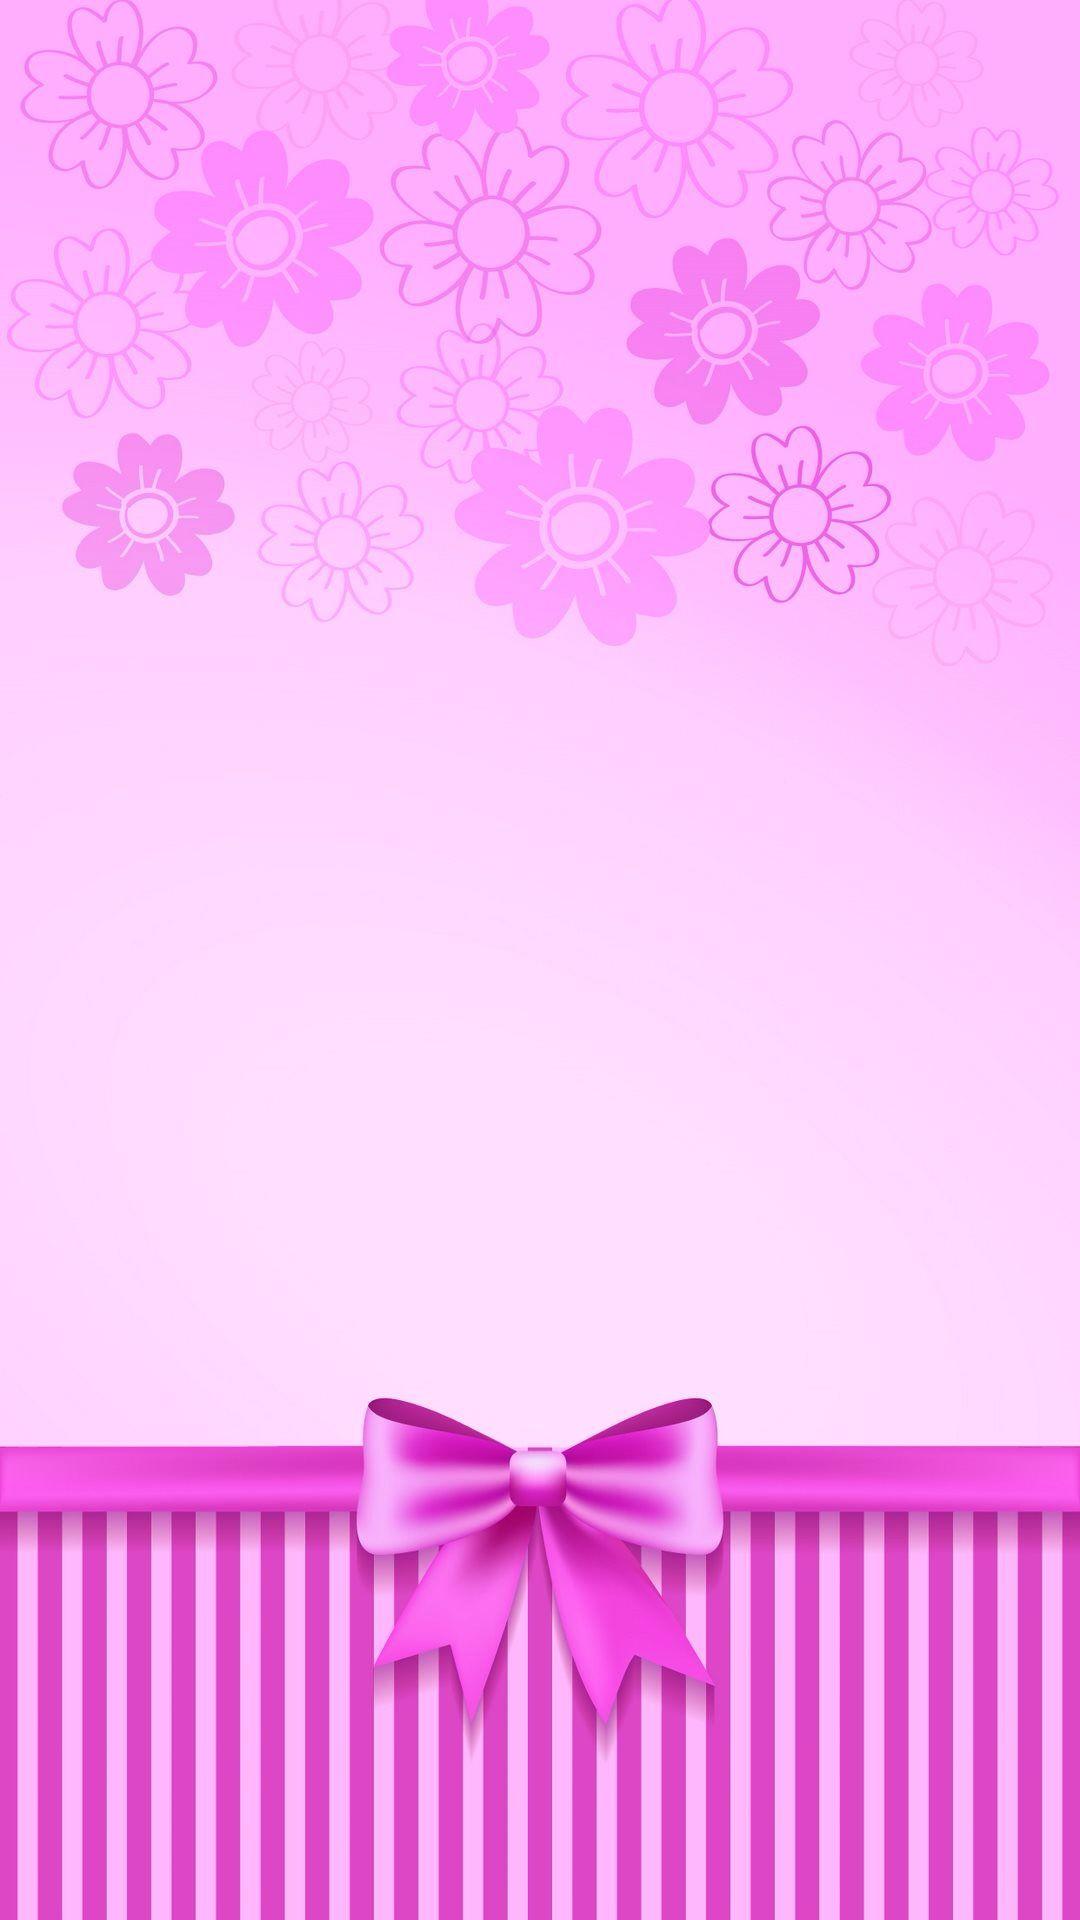 Pink Bow Wallpaper.By Artist Unknown. Phone wallpaper